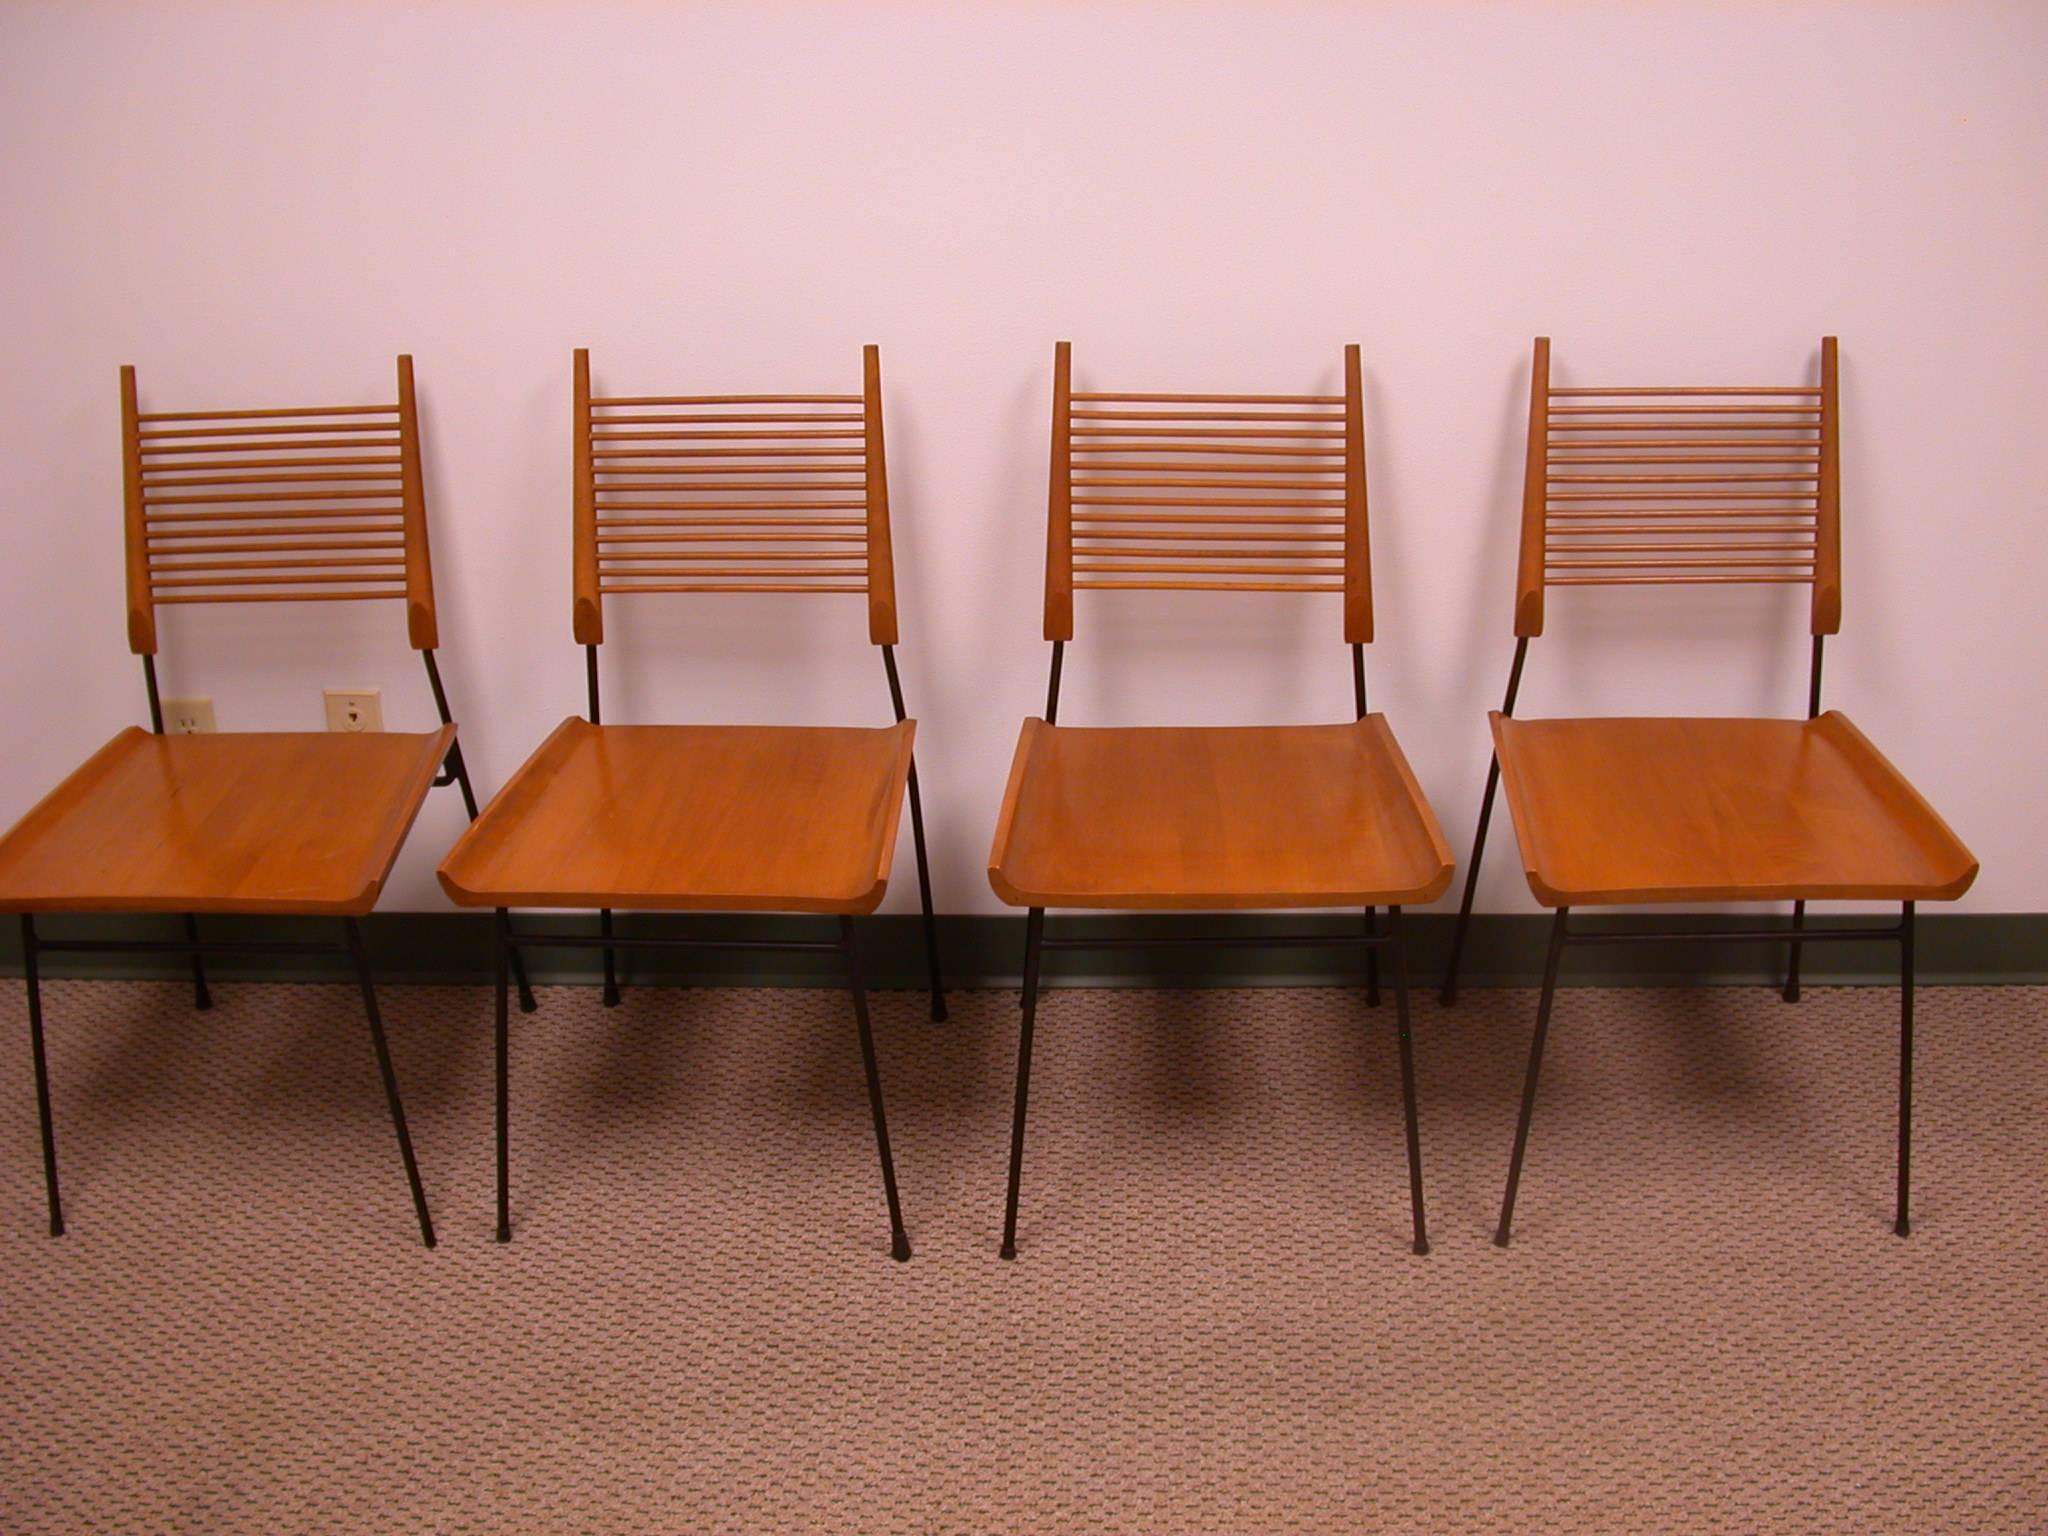 1950s Paul McCobb-designed planner group dining table set and four chairs. McCobb was arguably responsible for the introduction of modern design into middle-class American households if for no other reason than that he designed the 1952 set for the